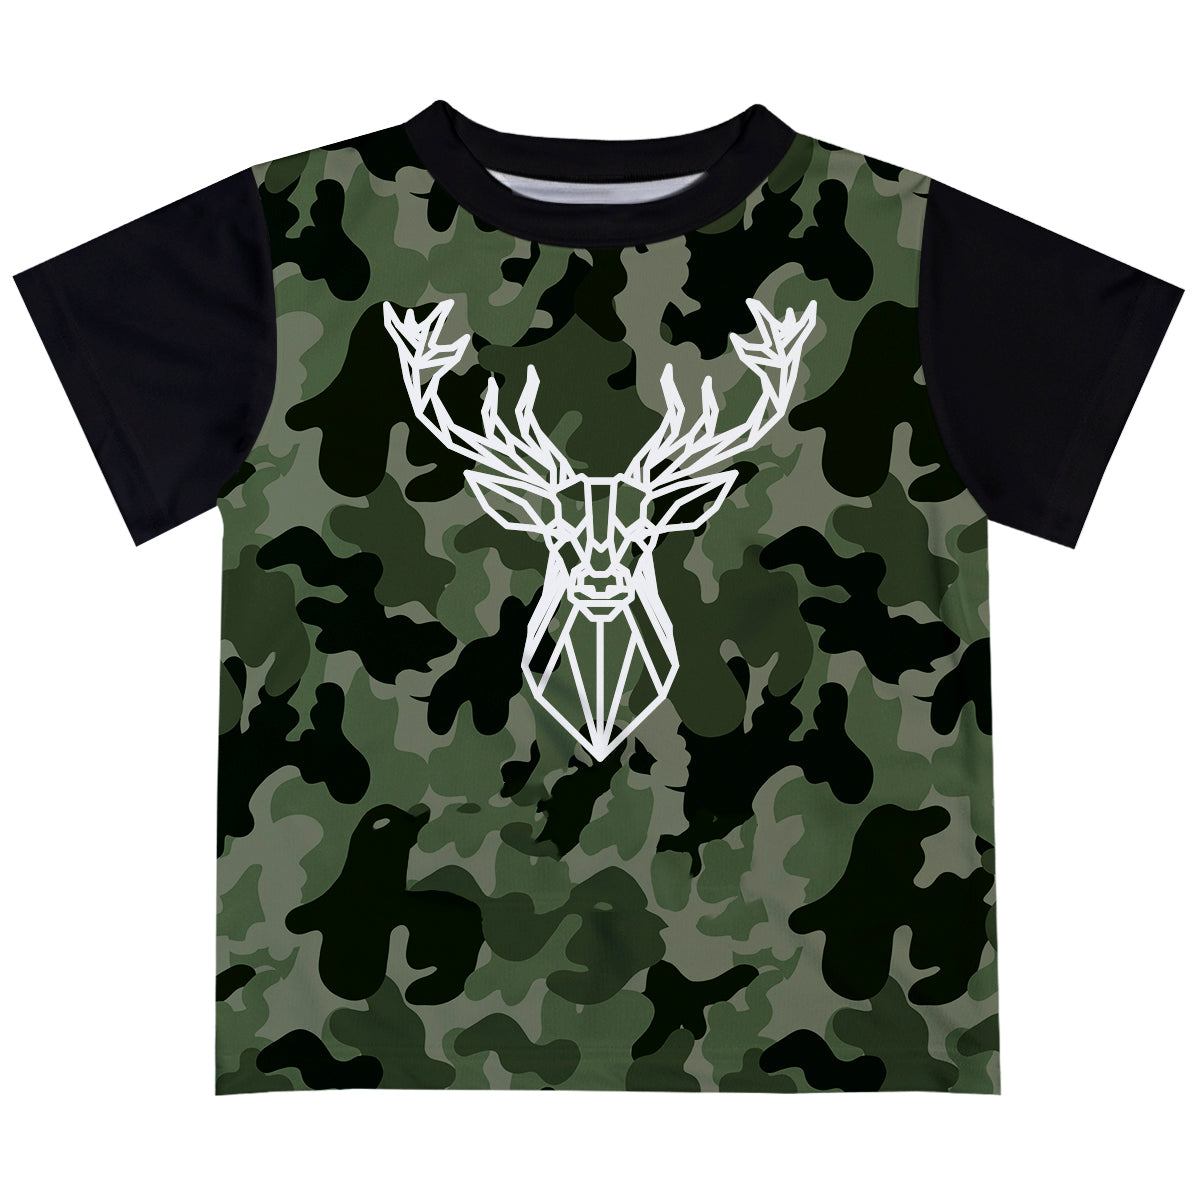 Boys green camo and white deer short sleeve tee shirt with name - Wimziy&Co.